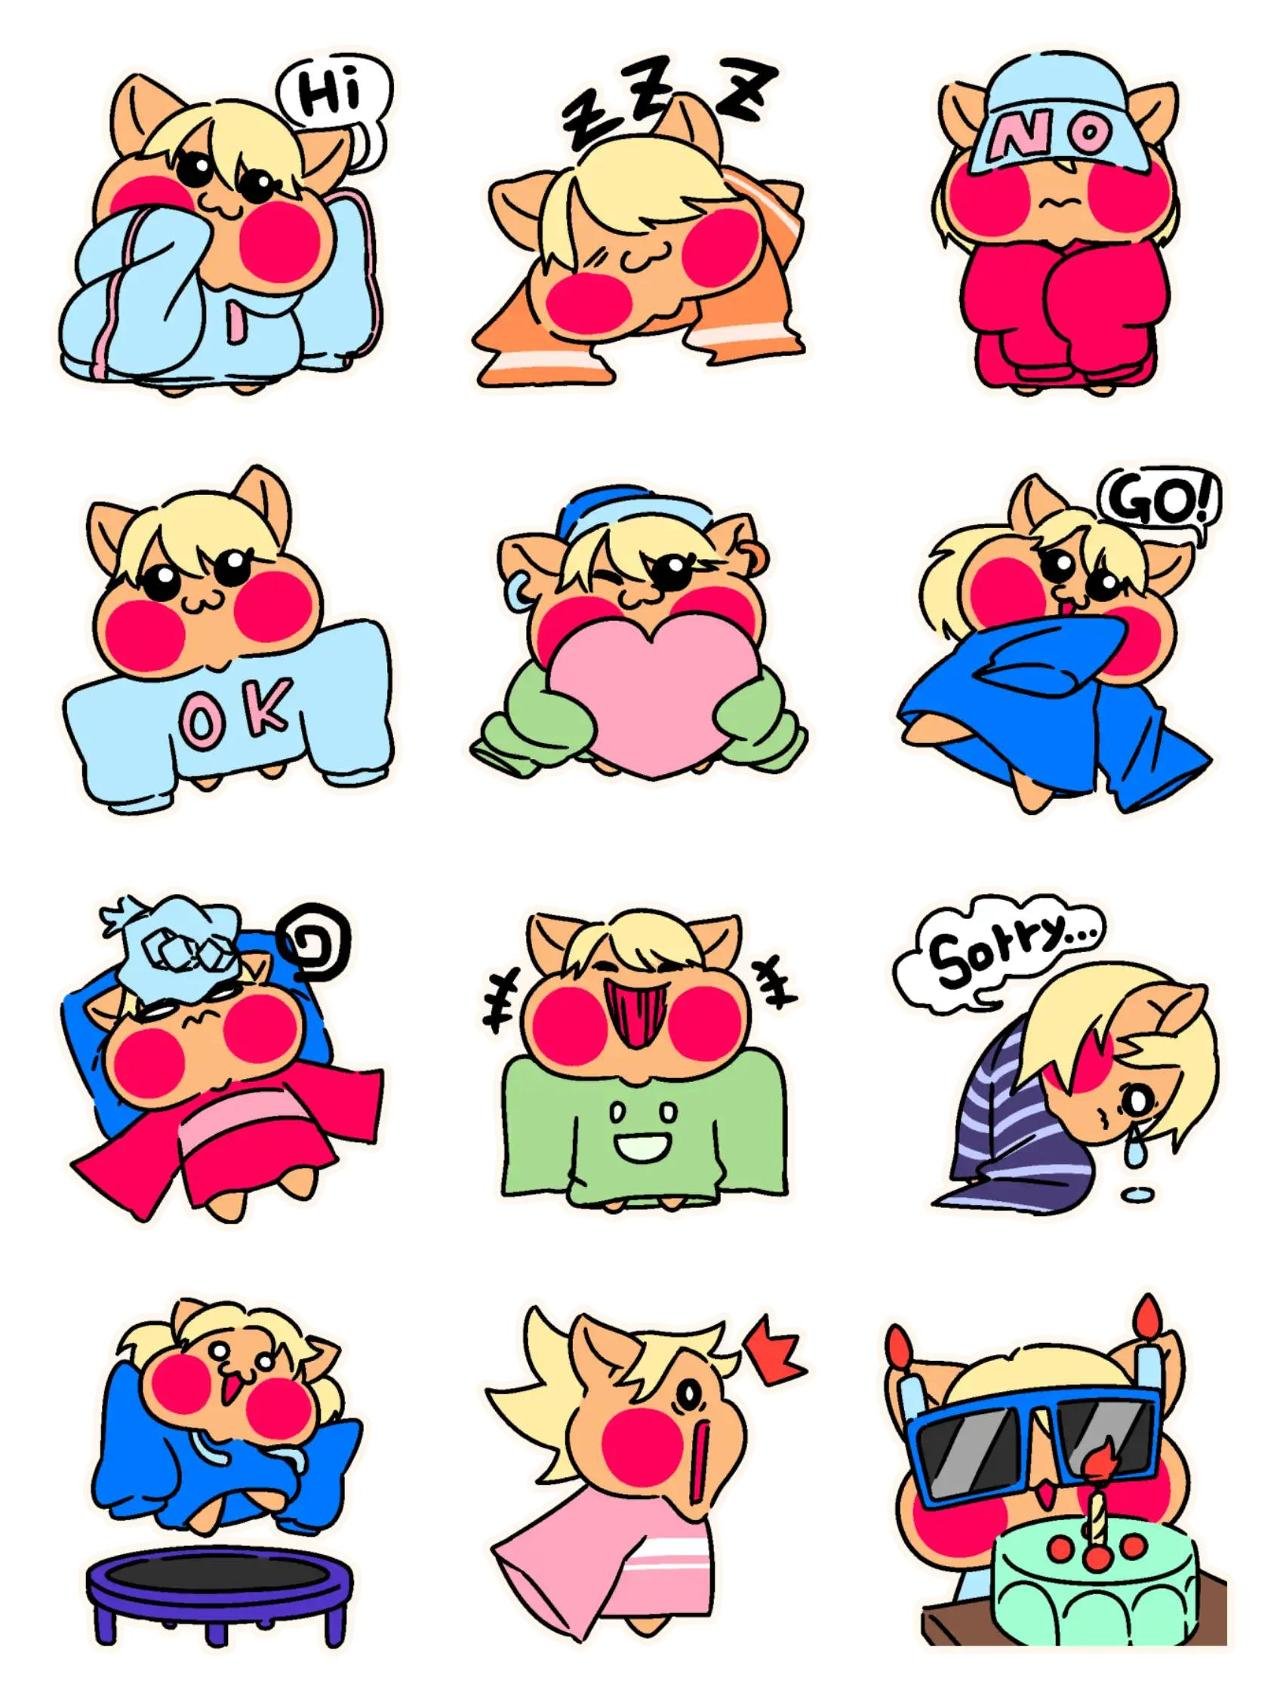 Yellowee sticker pack Animation/Cartoon,Animals sticker pack for Whatsapp, Telegram, Signal, and others chatting and message apps